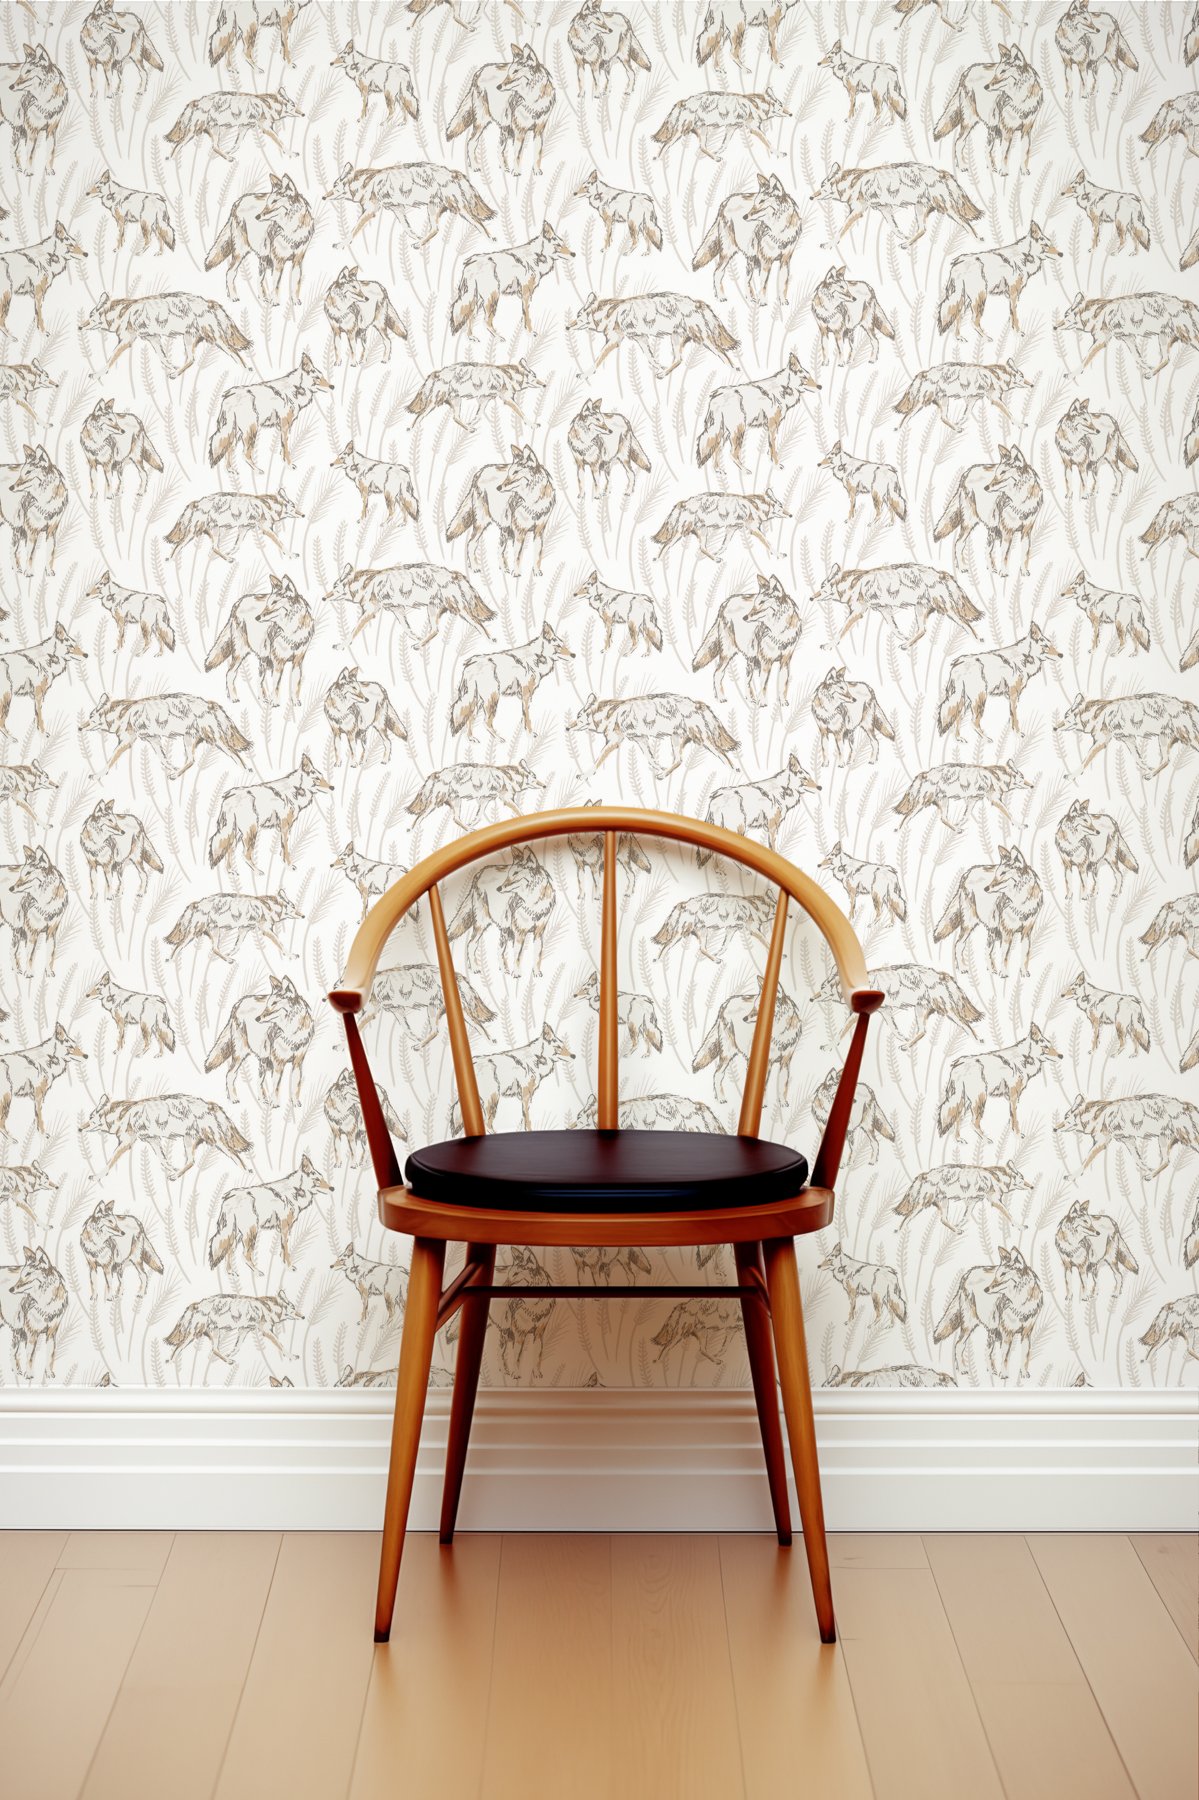 Kate Golding Coyote Putty Wallpaper